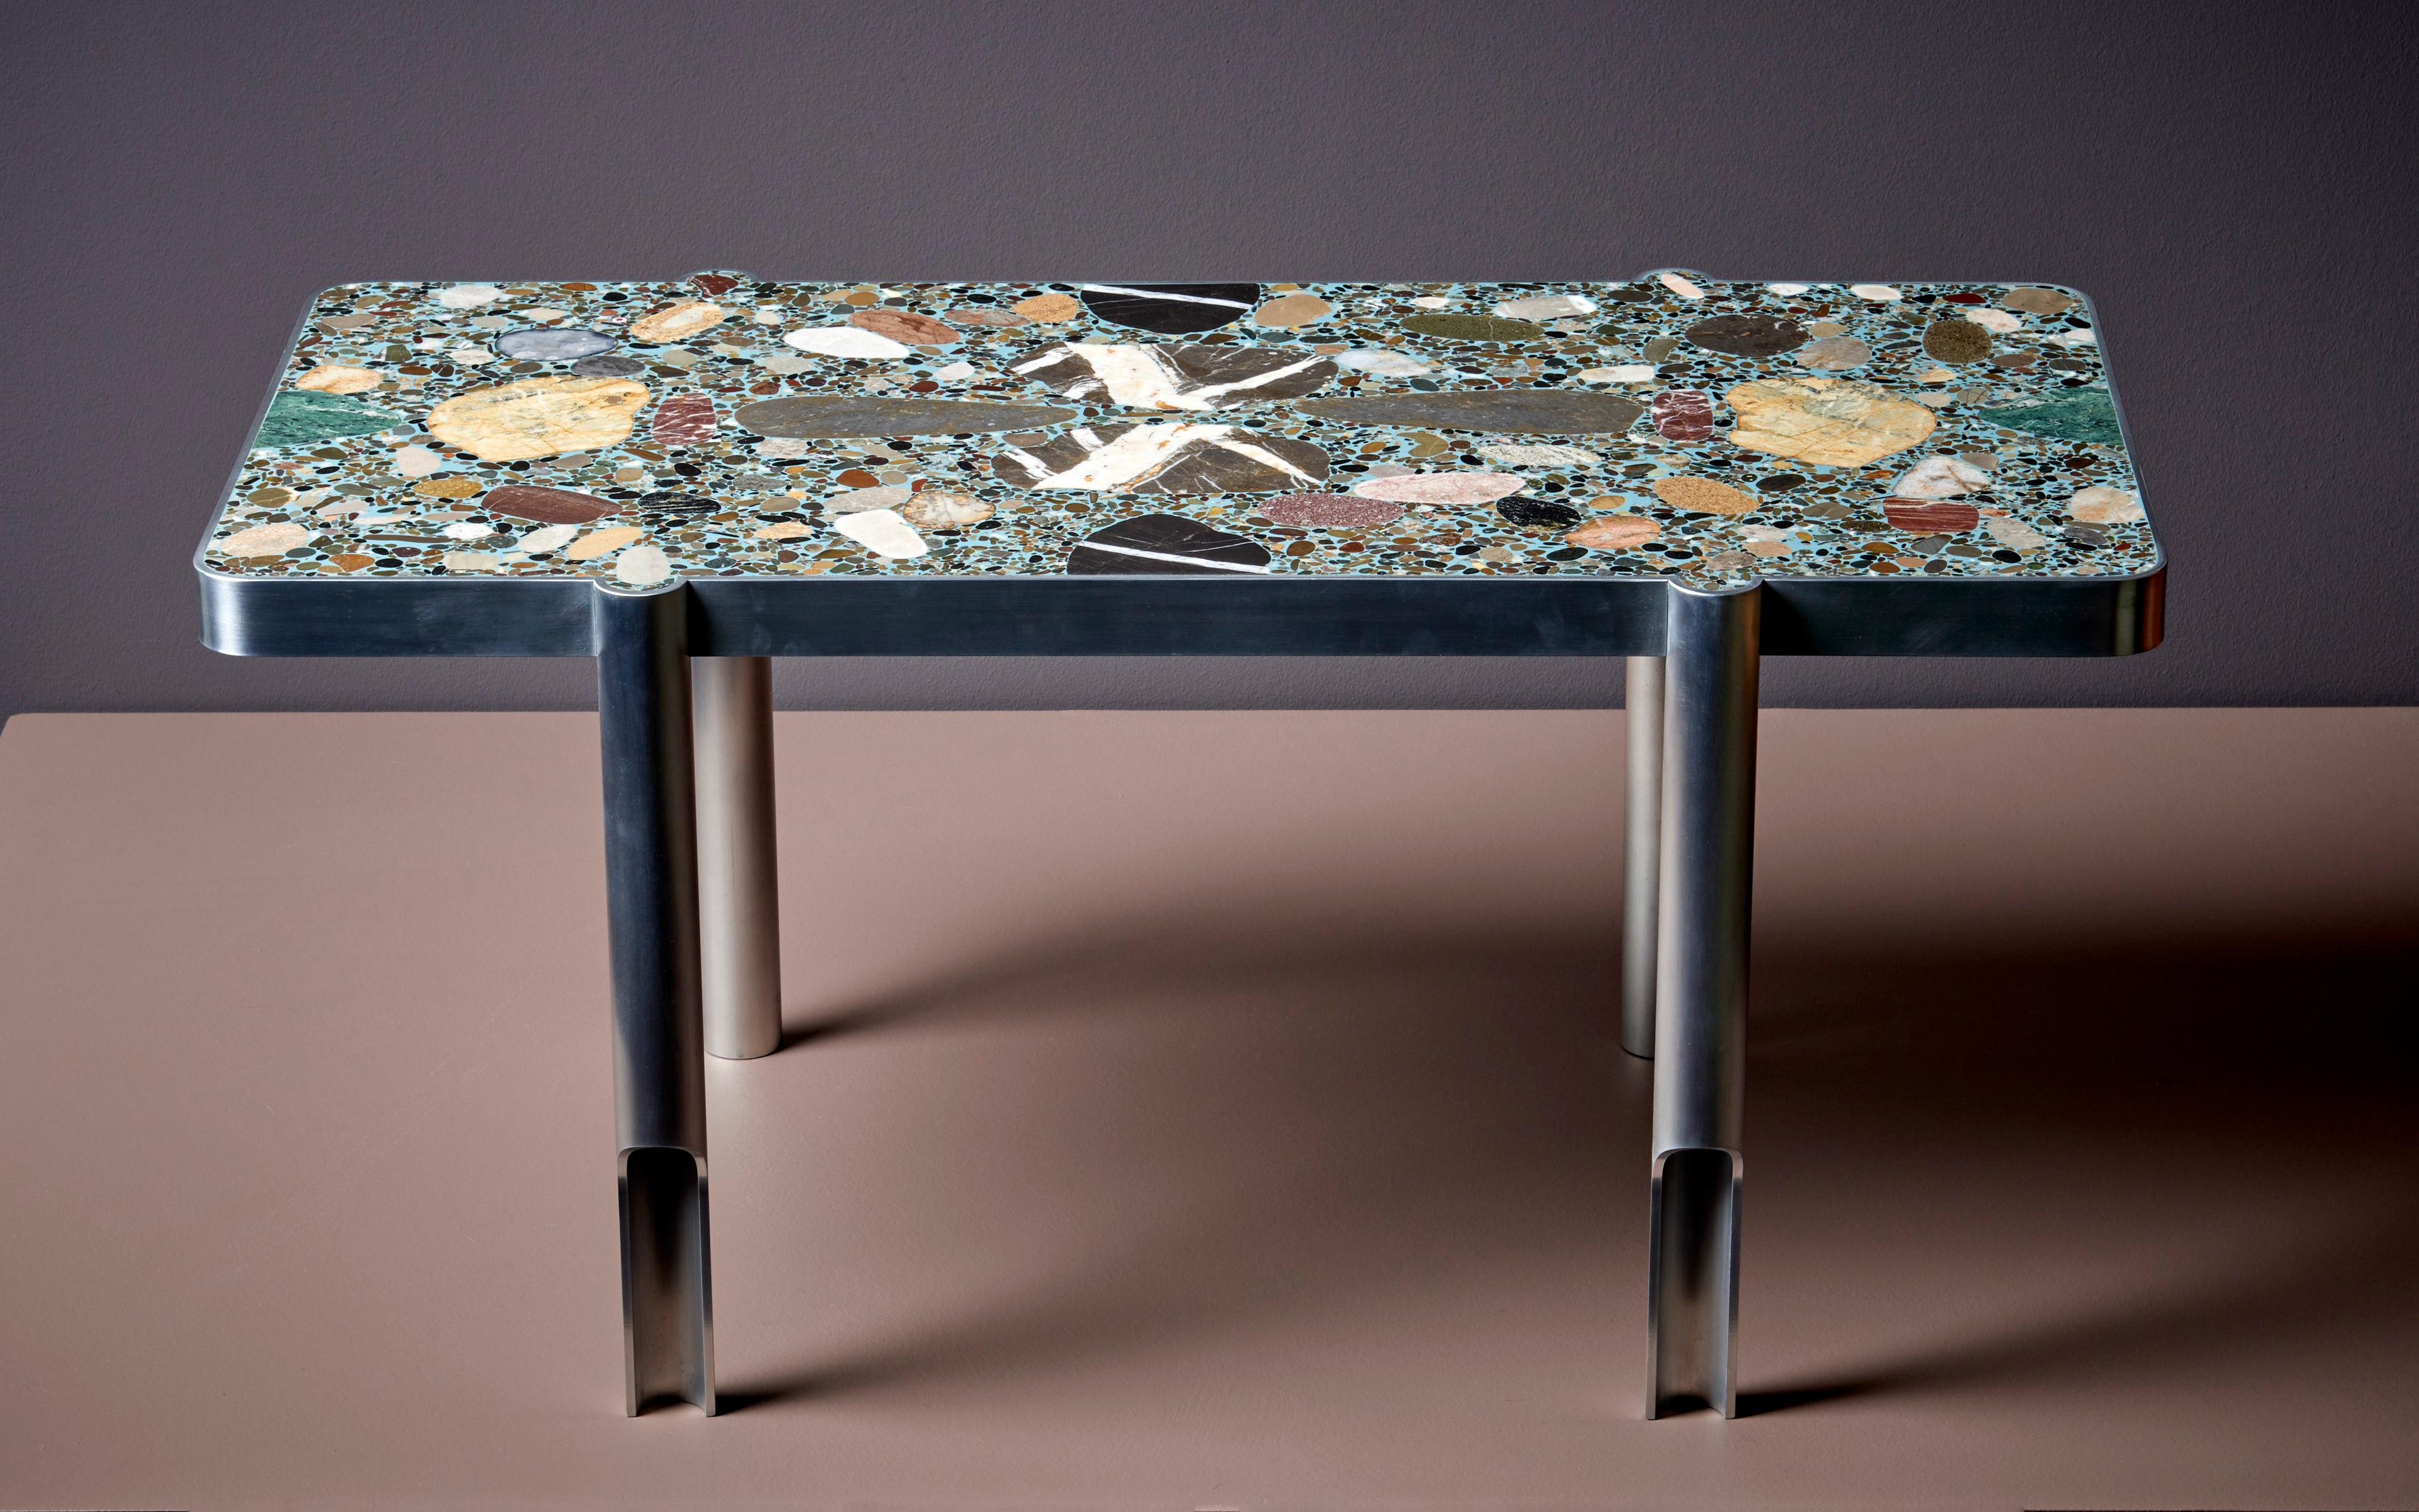 This table is handcrafted and has been made in three different sizes, please check our other listings. Each item made by Felix Muhrhofer is a unique, one-of-a-kind piece. Muhrhofer is an Austrian designer who primarily works with steel and terrazzo.